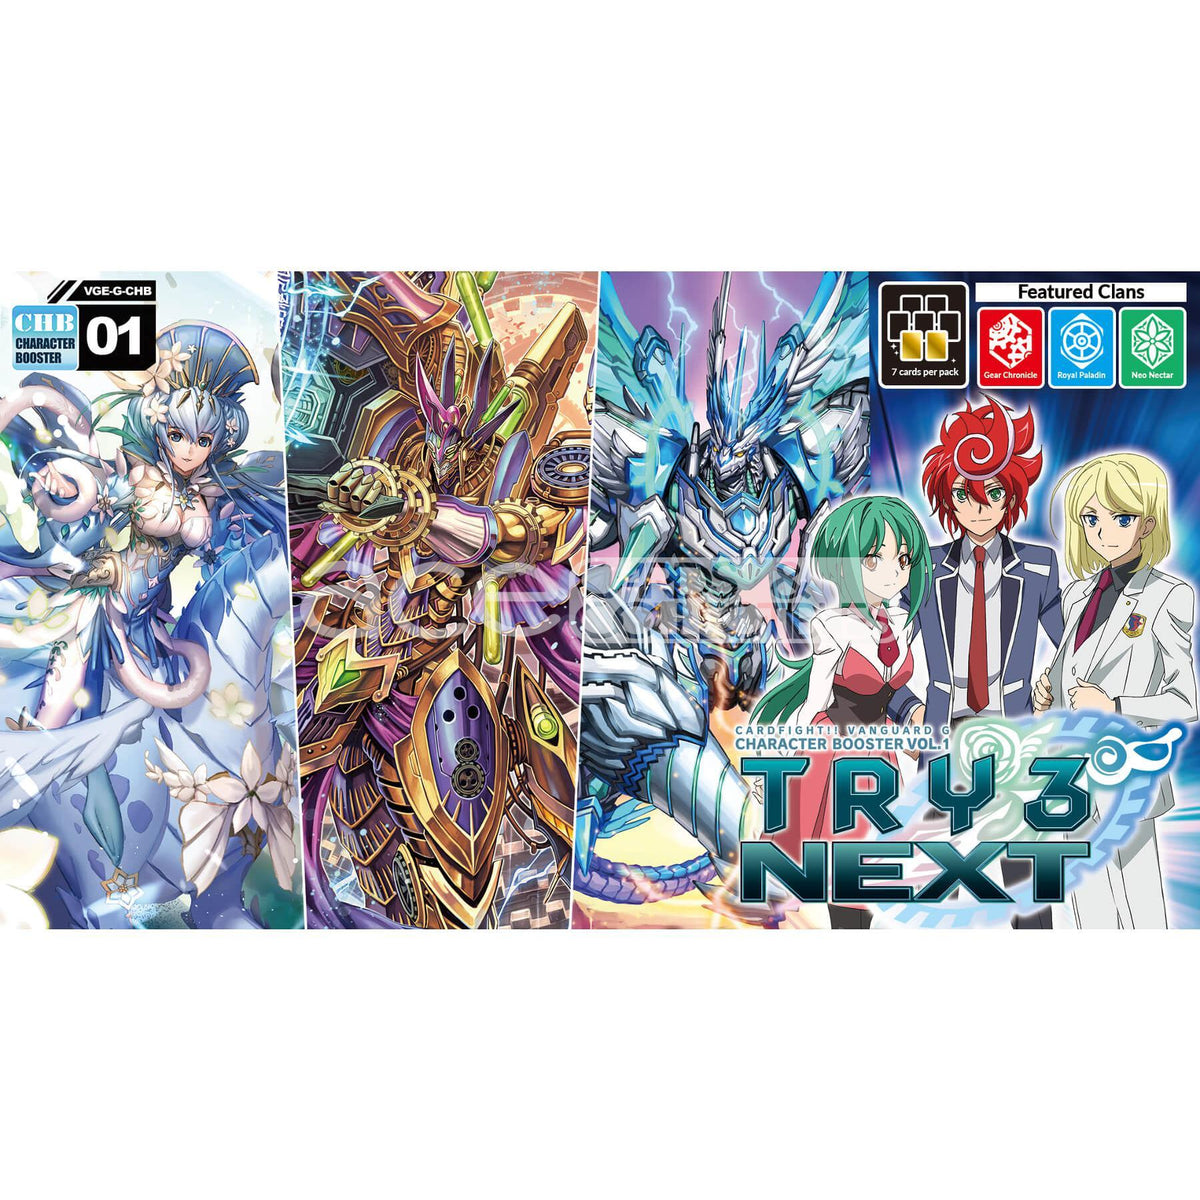 Cardfight Vanguard G Try3 Next [VGE-G-CHB01] (English)-Single Pack (Random)-Bushiroad-Ace Cards &amp; Collectibles